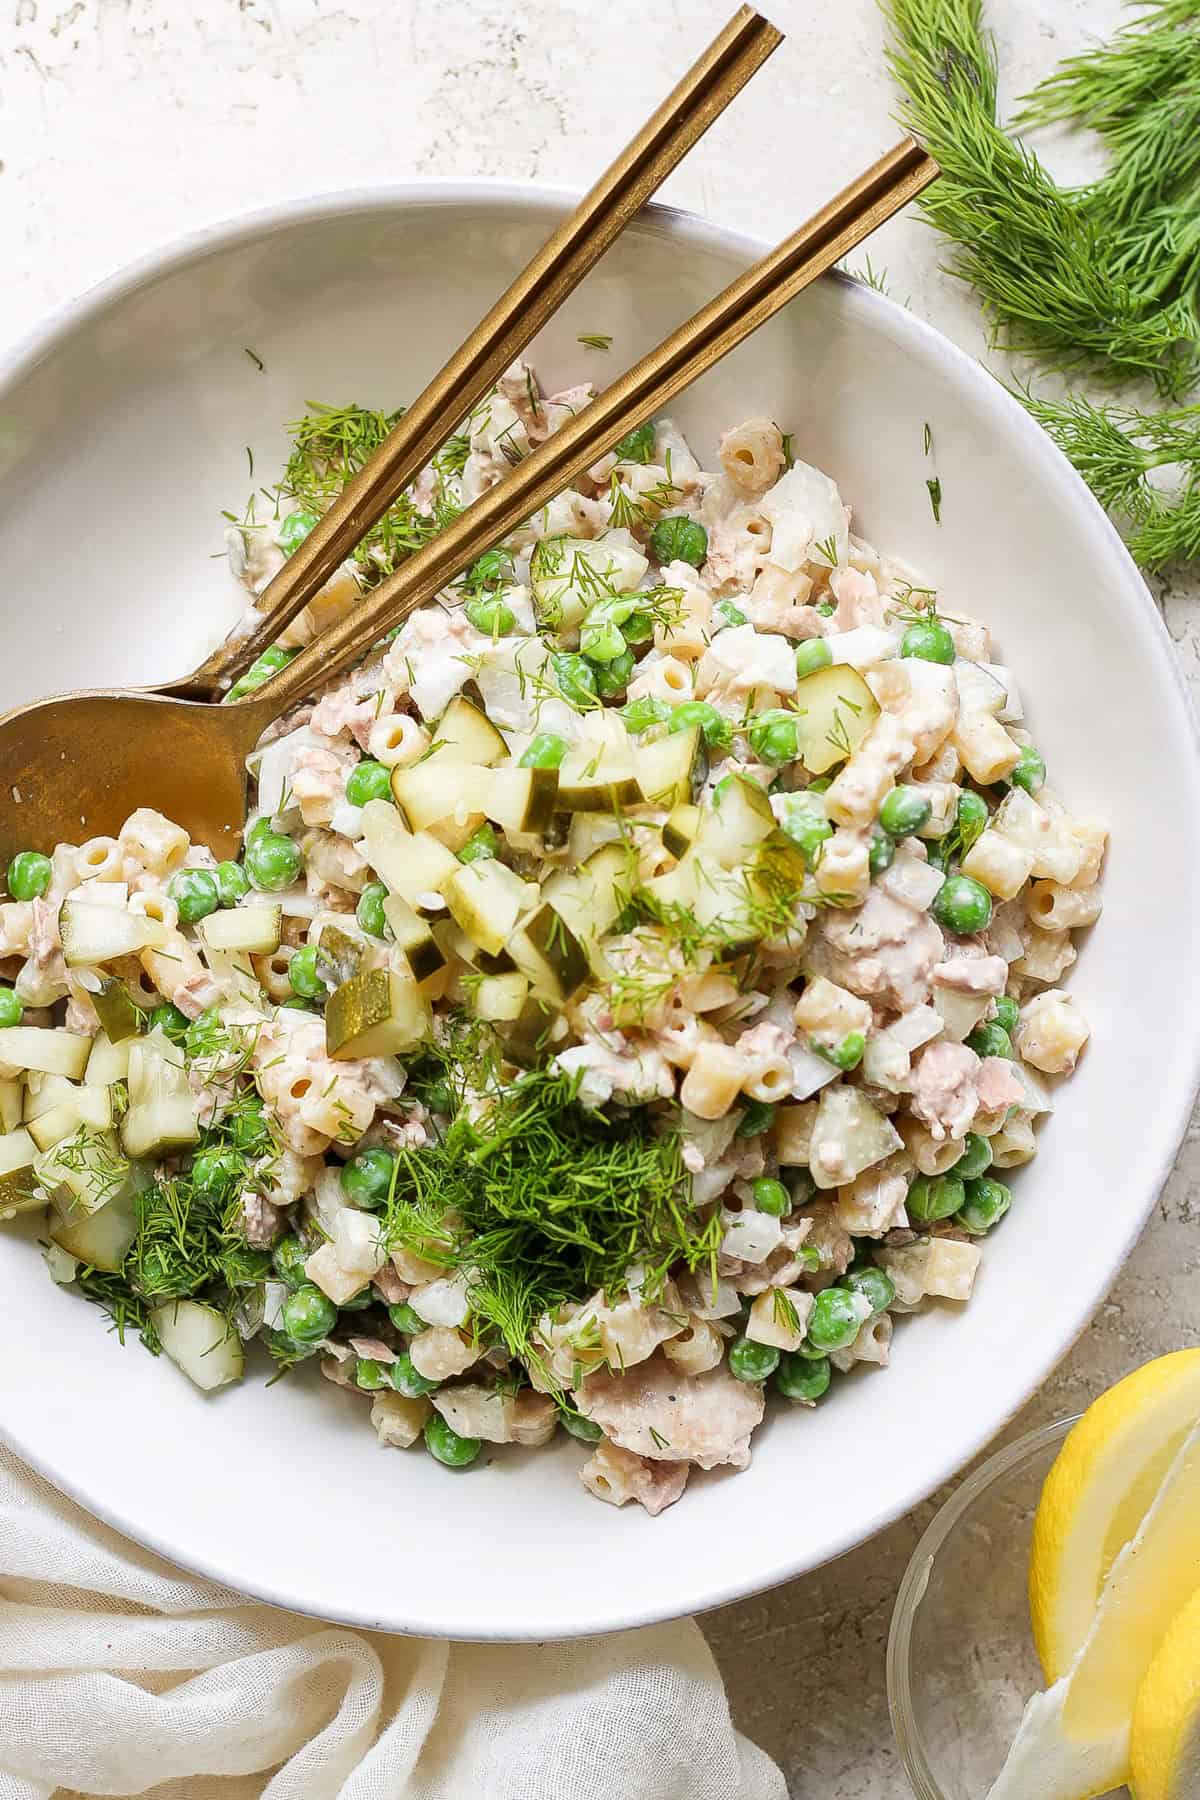 A bowl of tuna salad with peas, c،pped cu،ber, and dill, served with a pair of c،psticks and fresh lemon slices on a neutral-toned background.